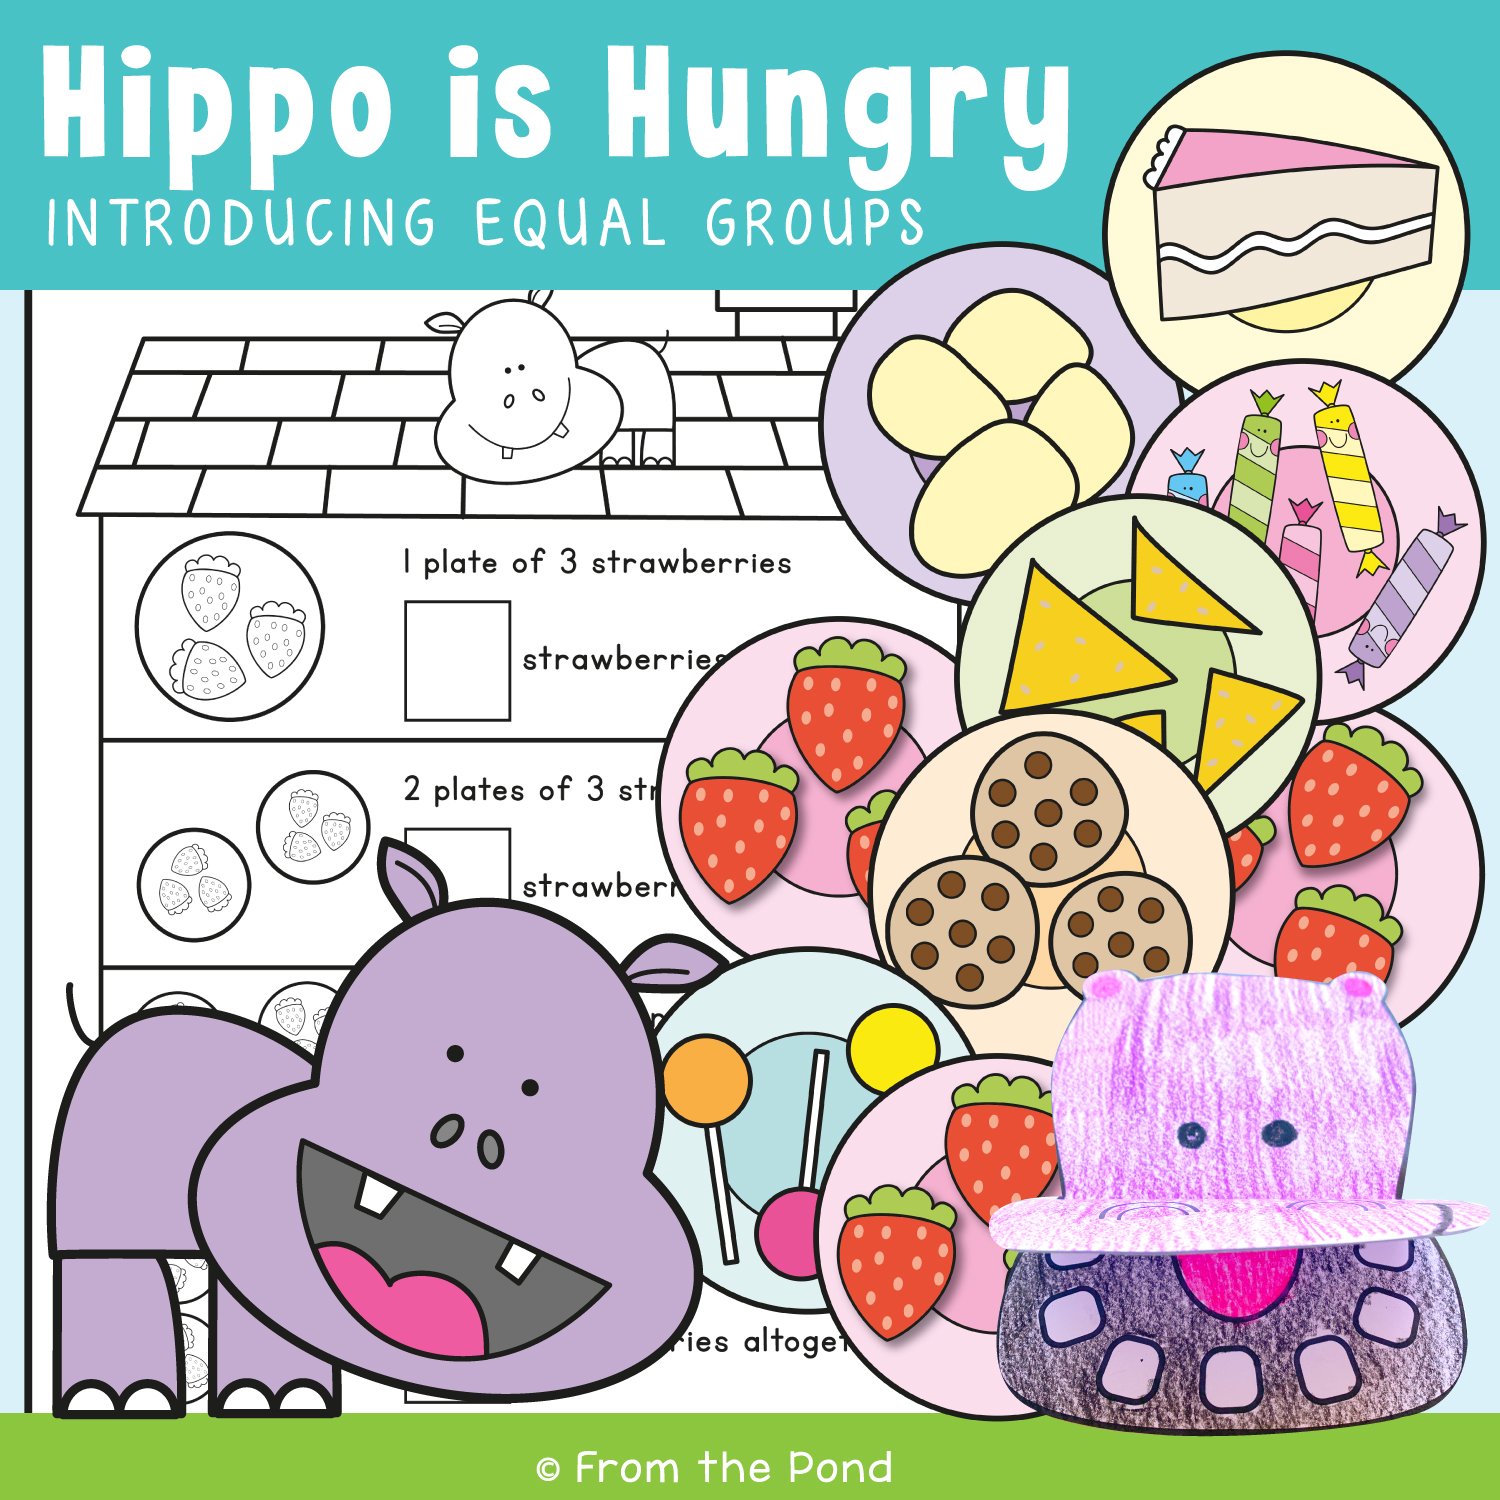 Hippo is Hungry